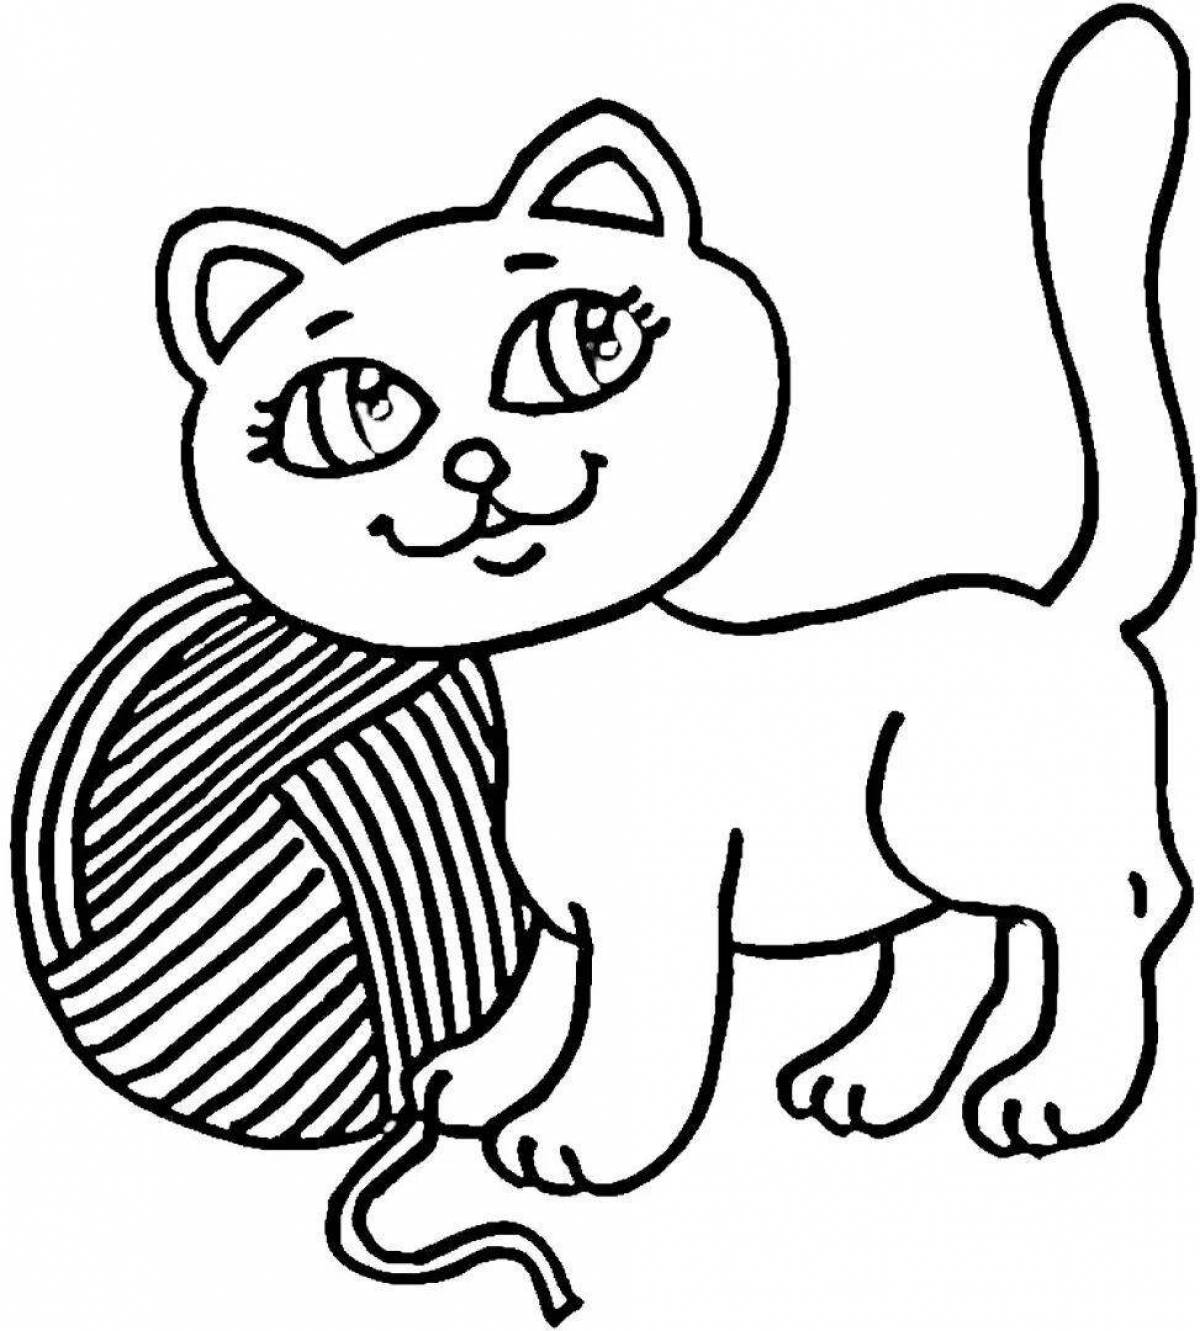 Coloring book colorful cat with a ball